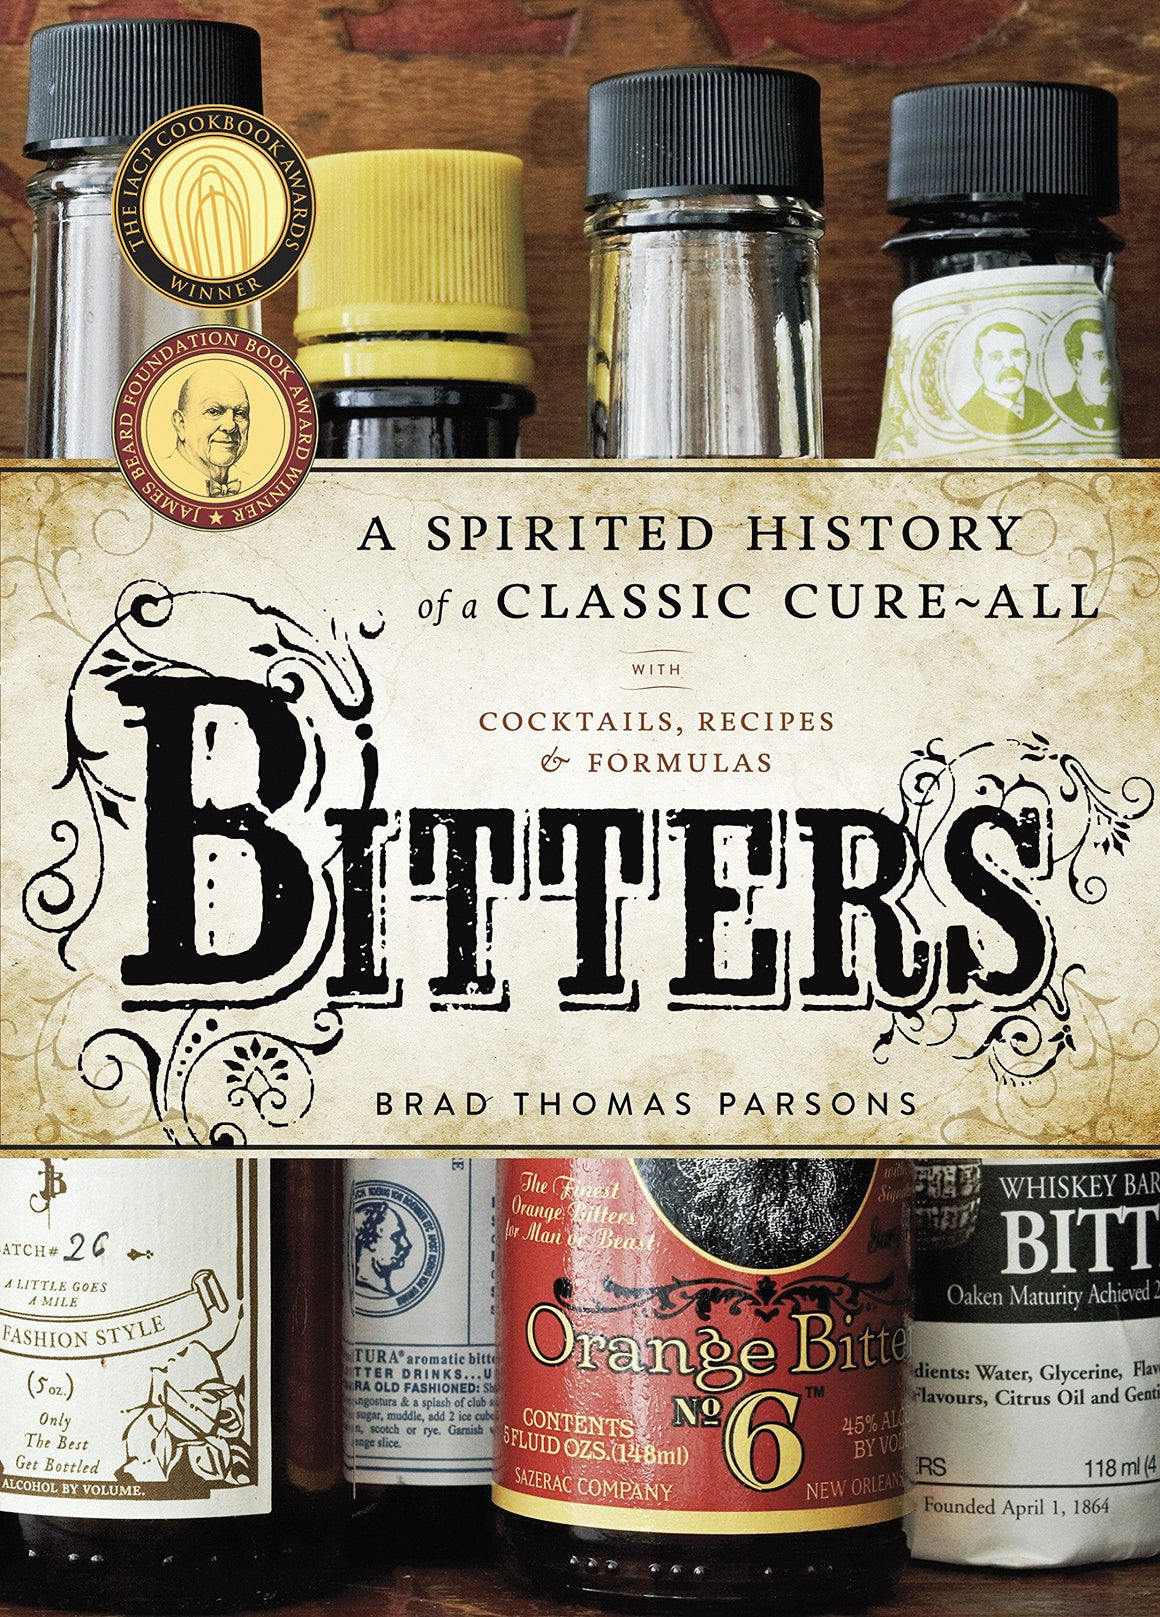 (Cocktails) Brad Thomas Parsons. Bitters: A Spirited History of a Classic Cure-All, with Cocktails, Recipes, and Formula. SIGNED!